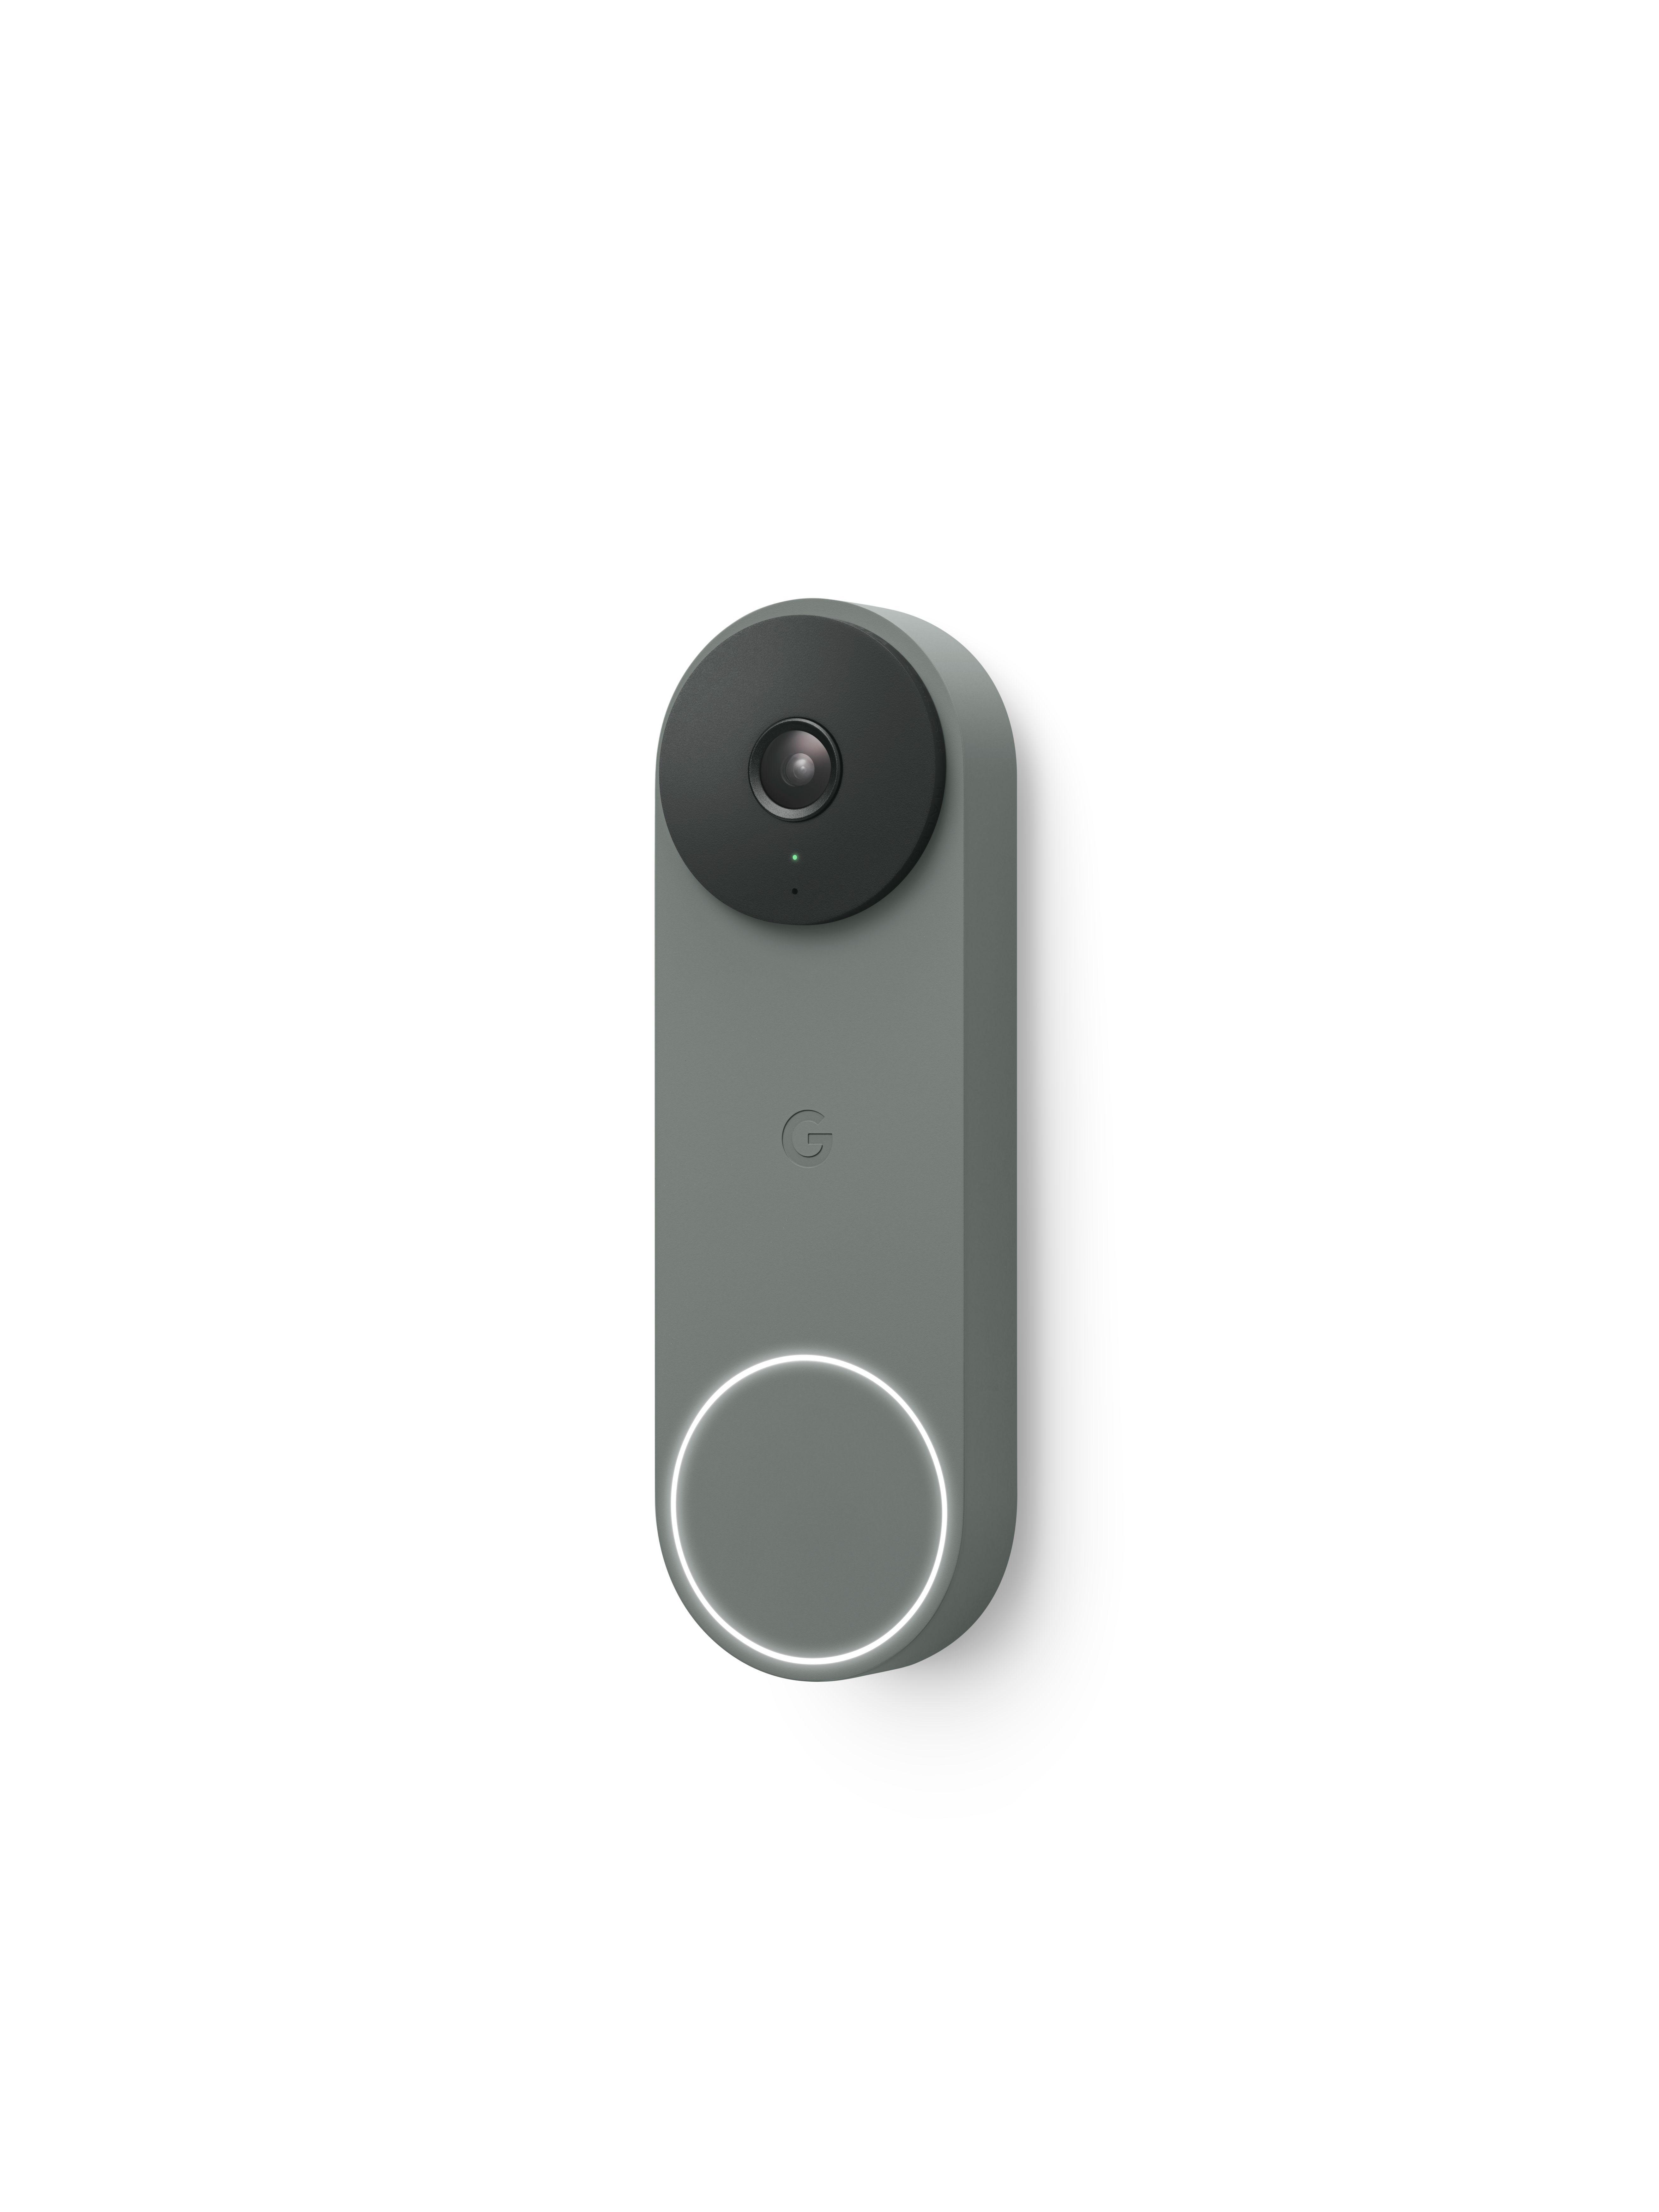 Nest-Doorbell-(wired-2nd-gen)_Ortho_perspective_Ivy-1